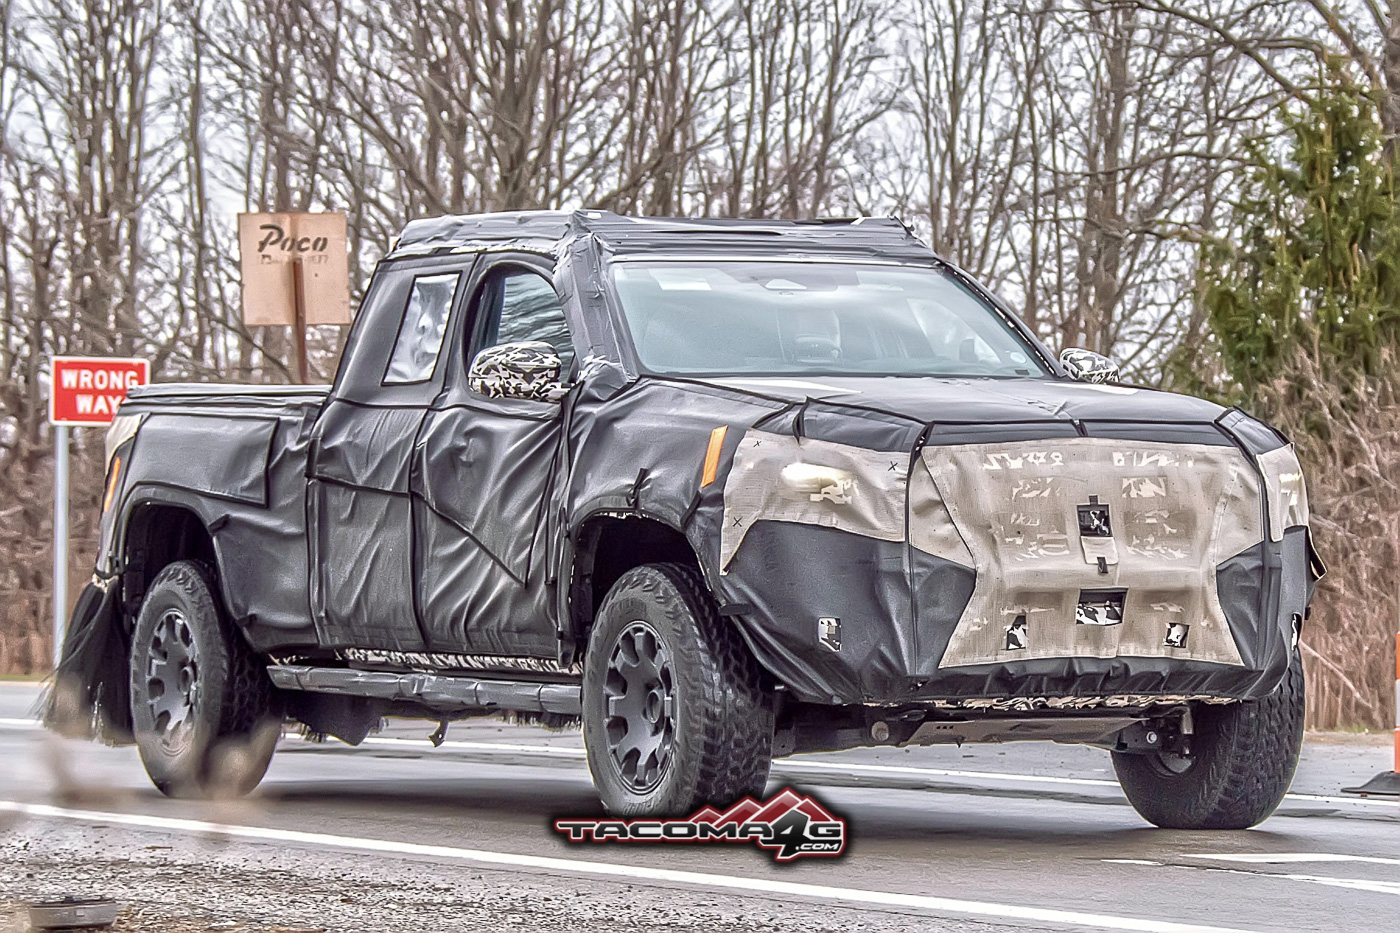 2024 Tacoma Spied: 2024 Toyota Tacoma TRD Pro / Trailhunter Prototype 1st Sighting Reveals Rugged Off-Road Details + Rear Disc Brakes 📸 2024-toyota-tacoma-trd-pro-prototype-3